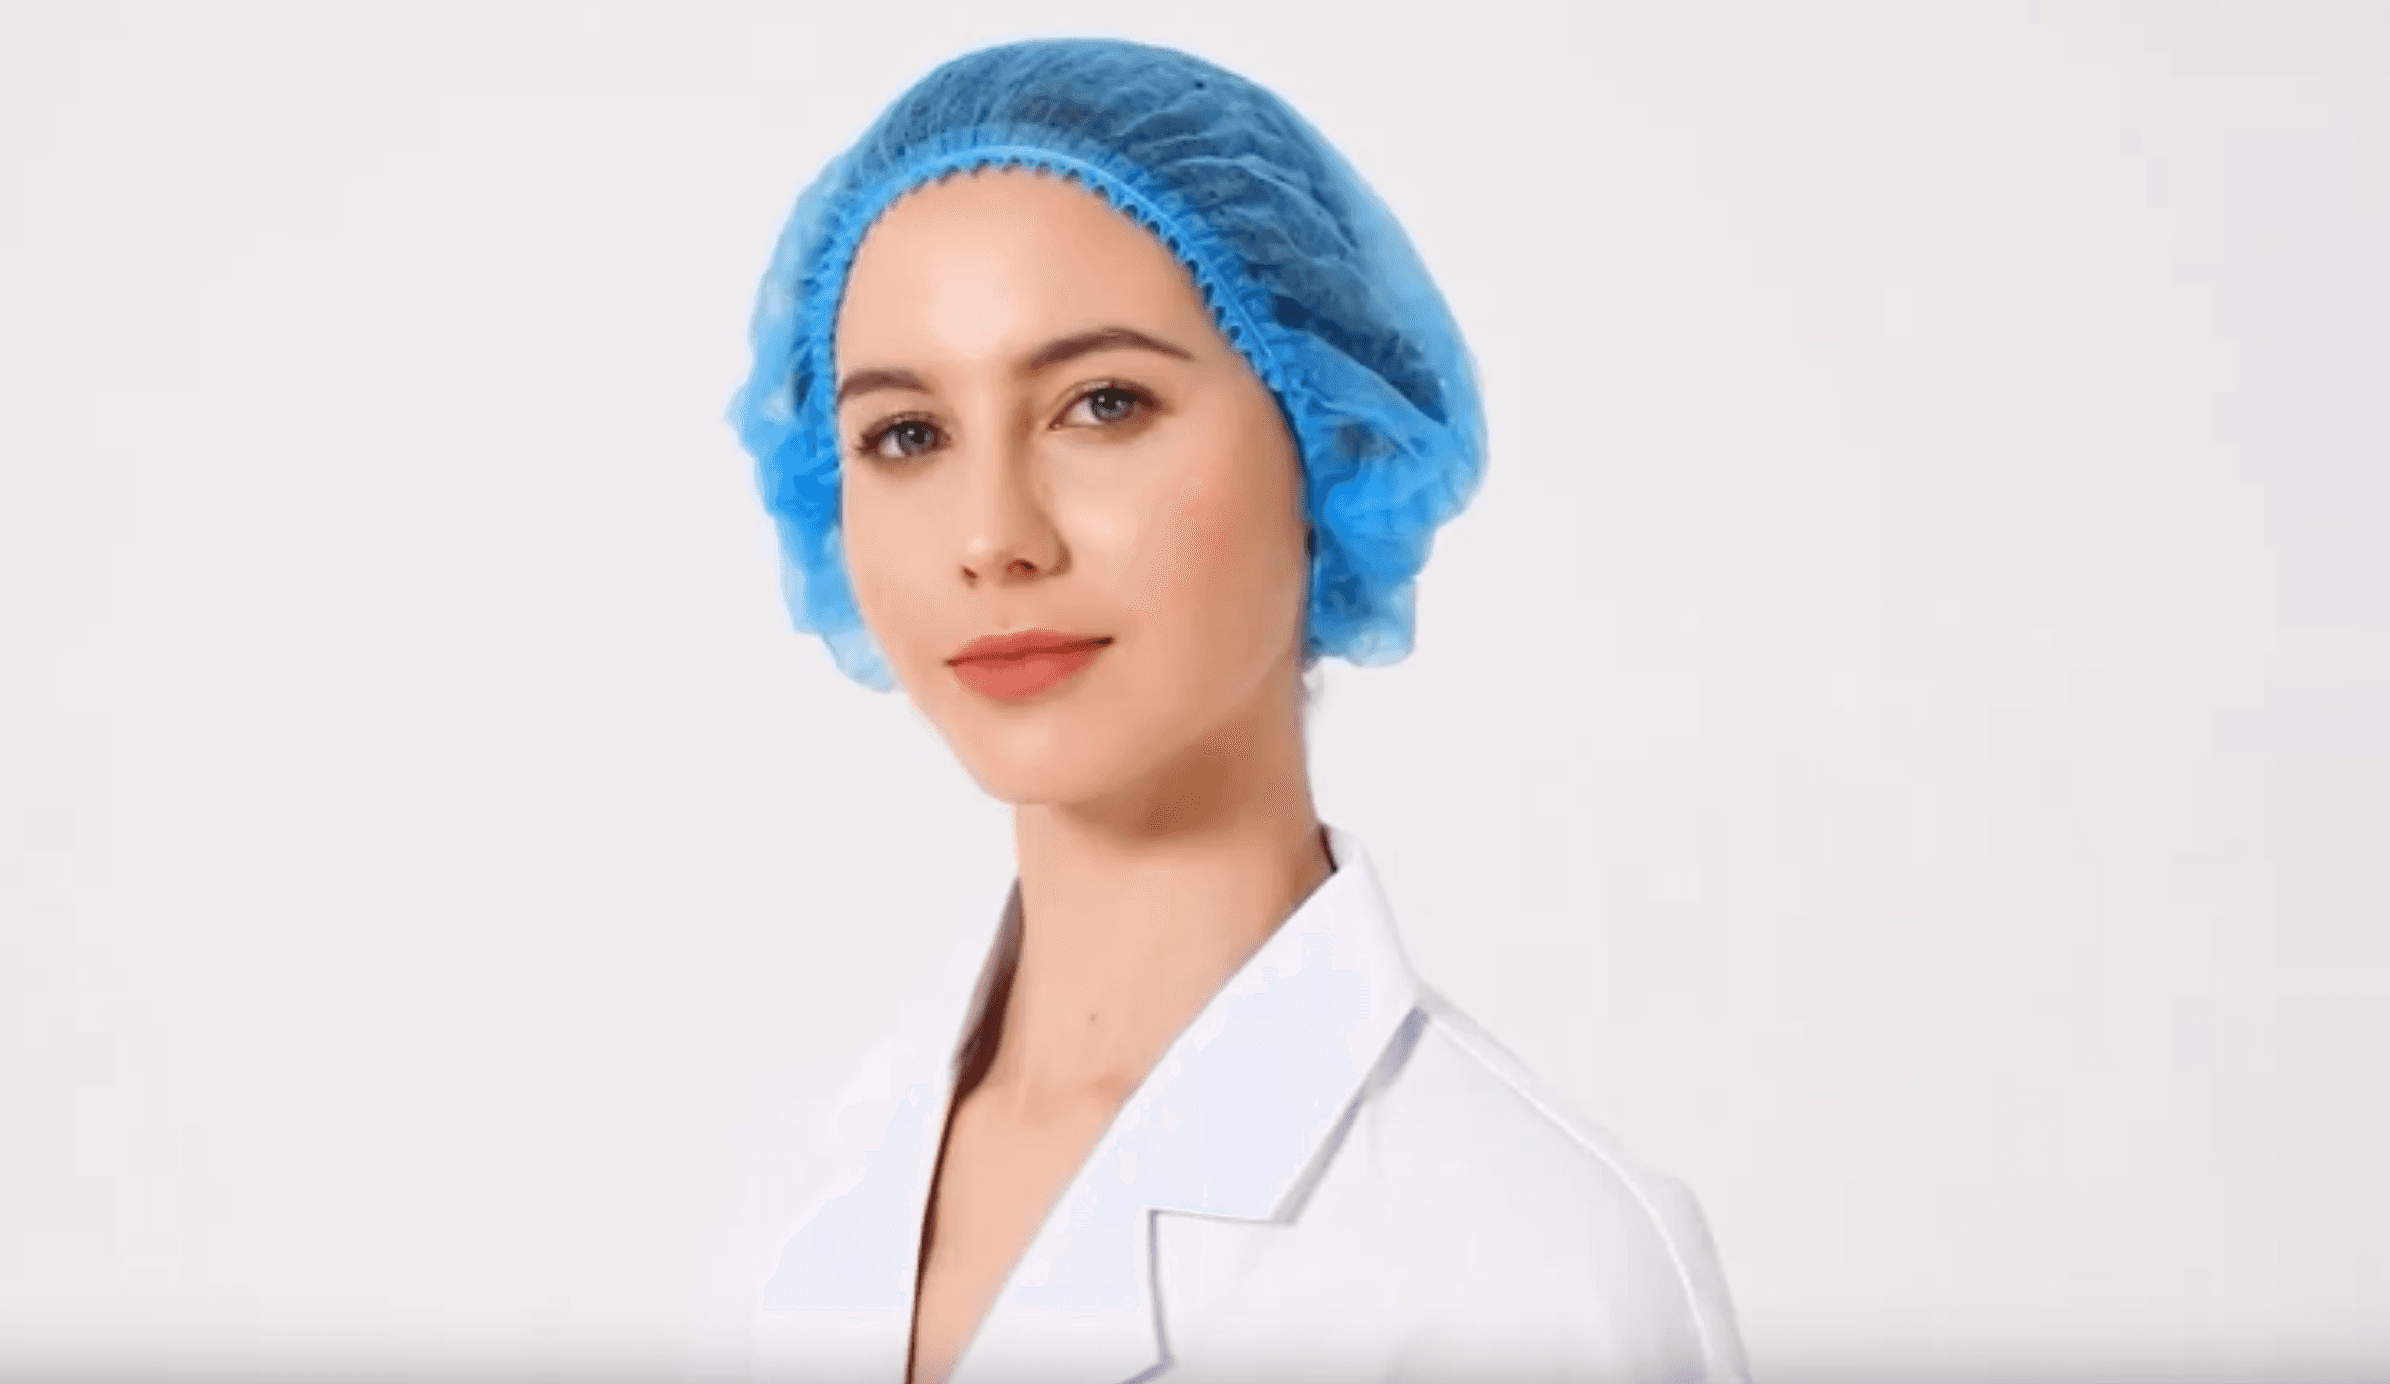 Disposable Bouffant Caps: How to Properly Use and Dispose of Disposable Bouffant Caps to Ensure Maximum Hygiene